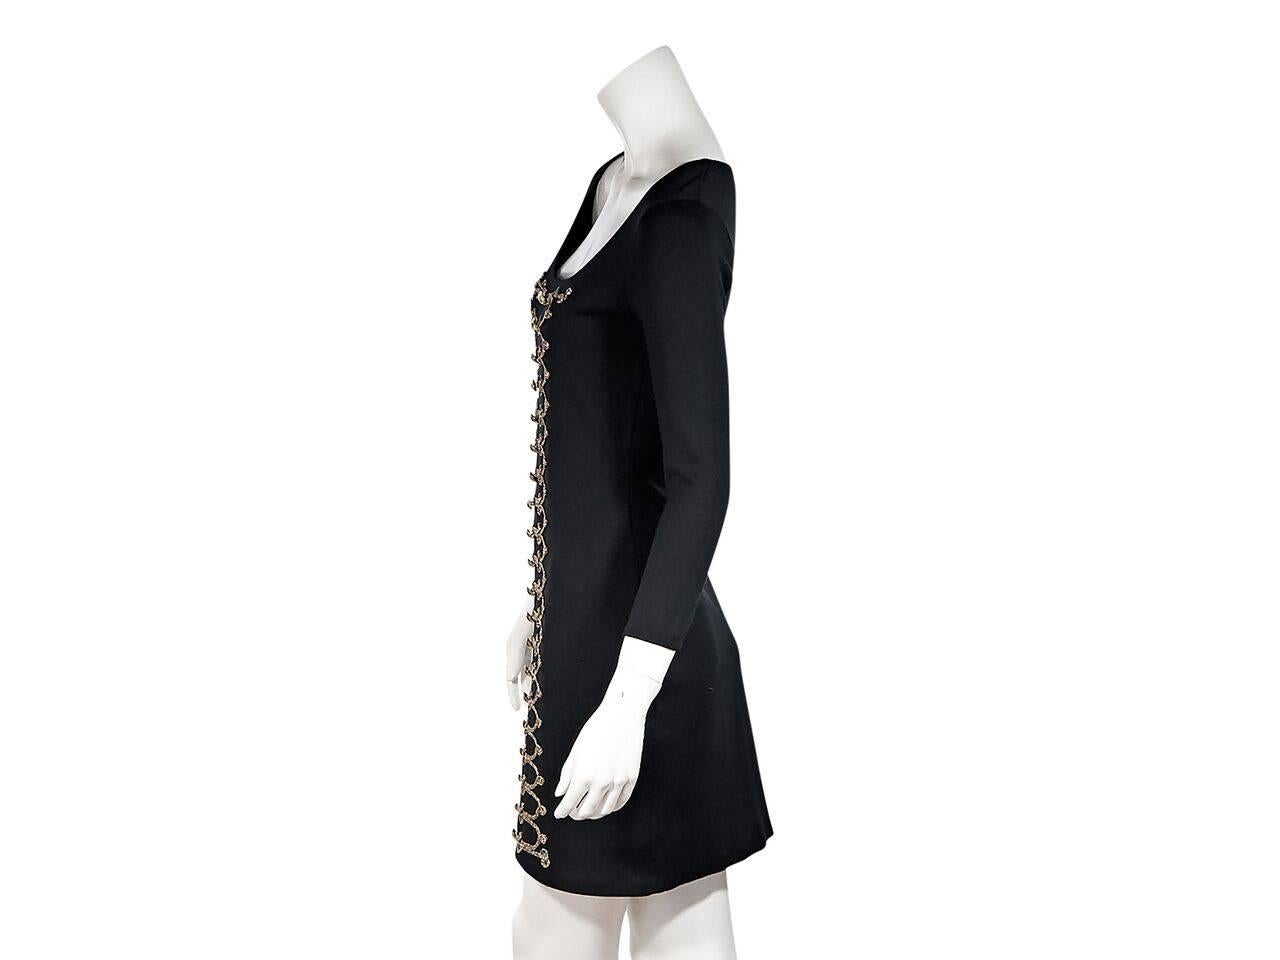 Product details:  Black knit sheath dress by Temperley London.  Deep scoopneck.  Three-quarter length sleeves.  Embellished front.  Pullover style. 
Condition: Pre-owned. Very good.
Est. Retail $ 528.00